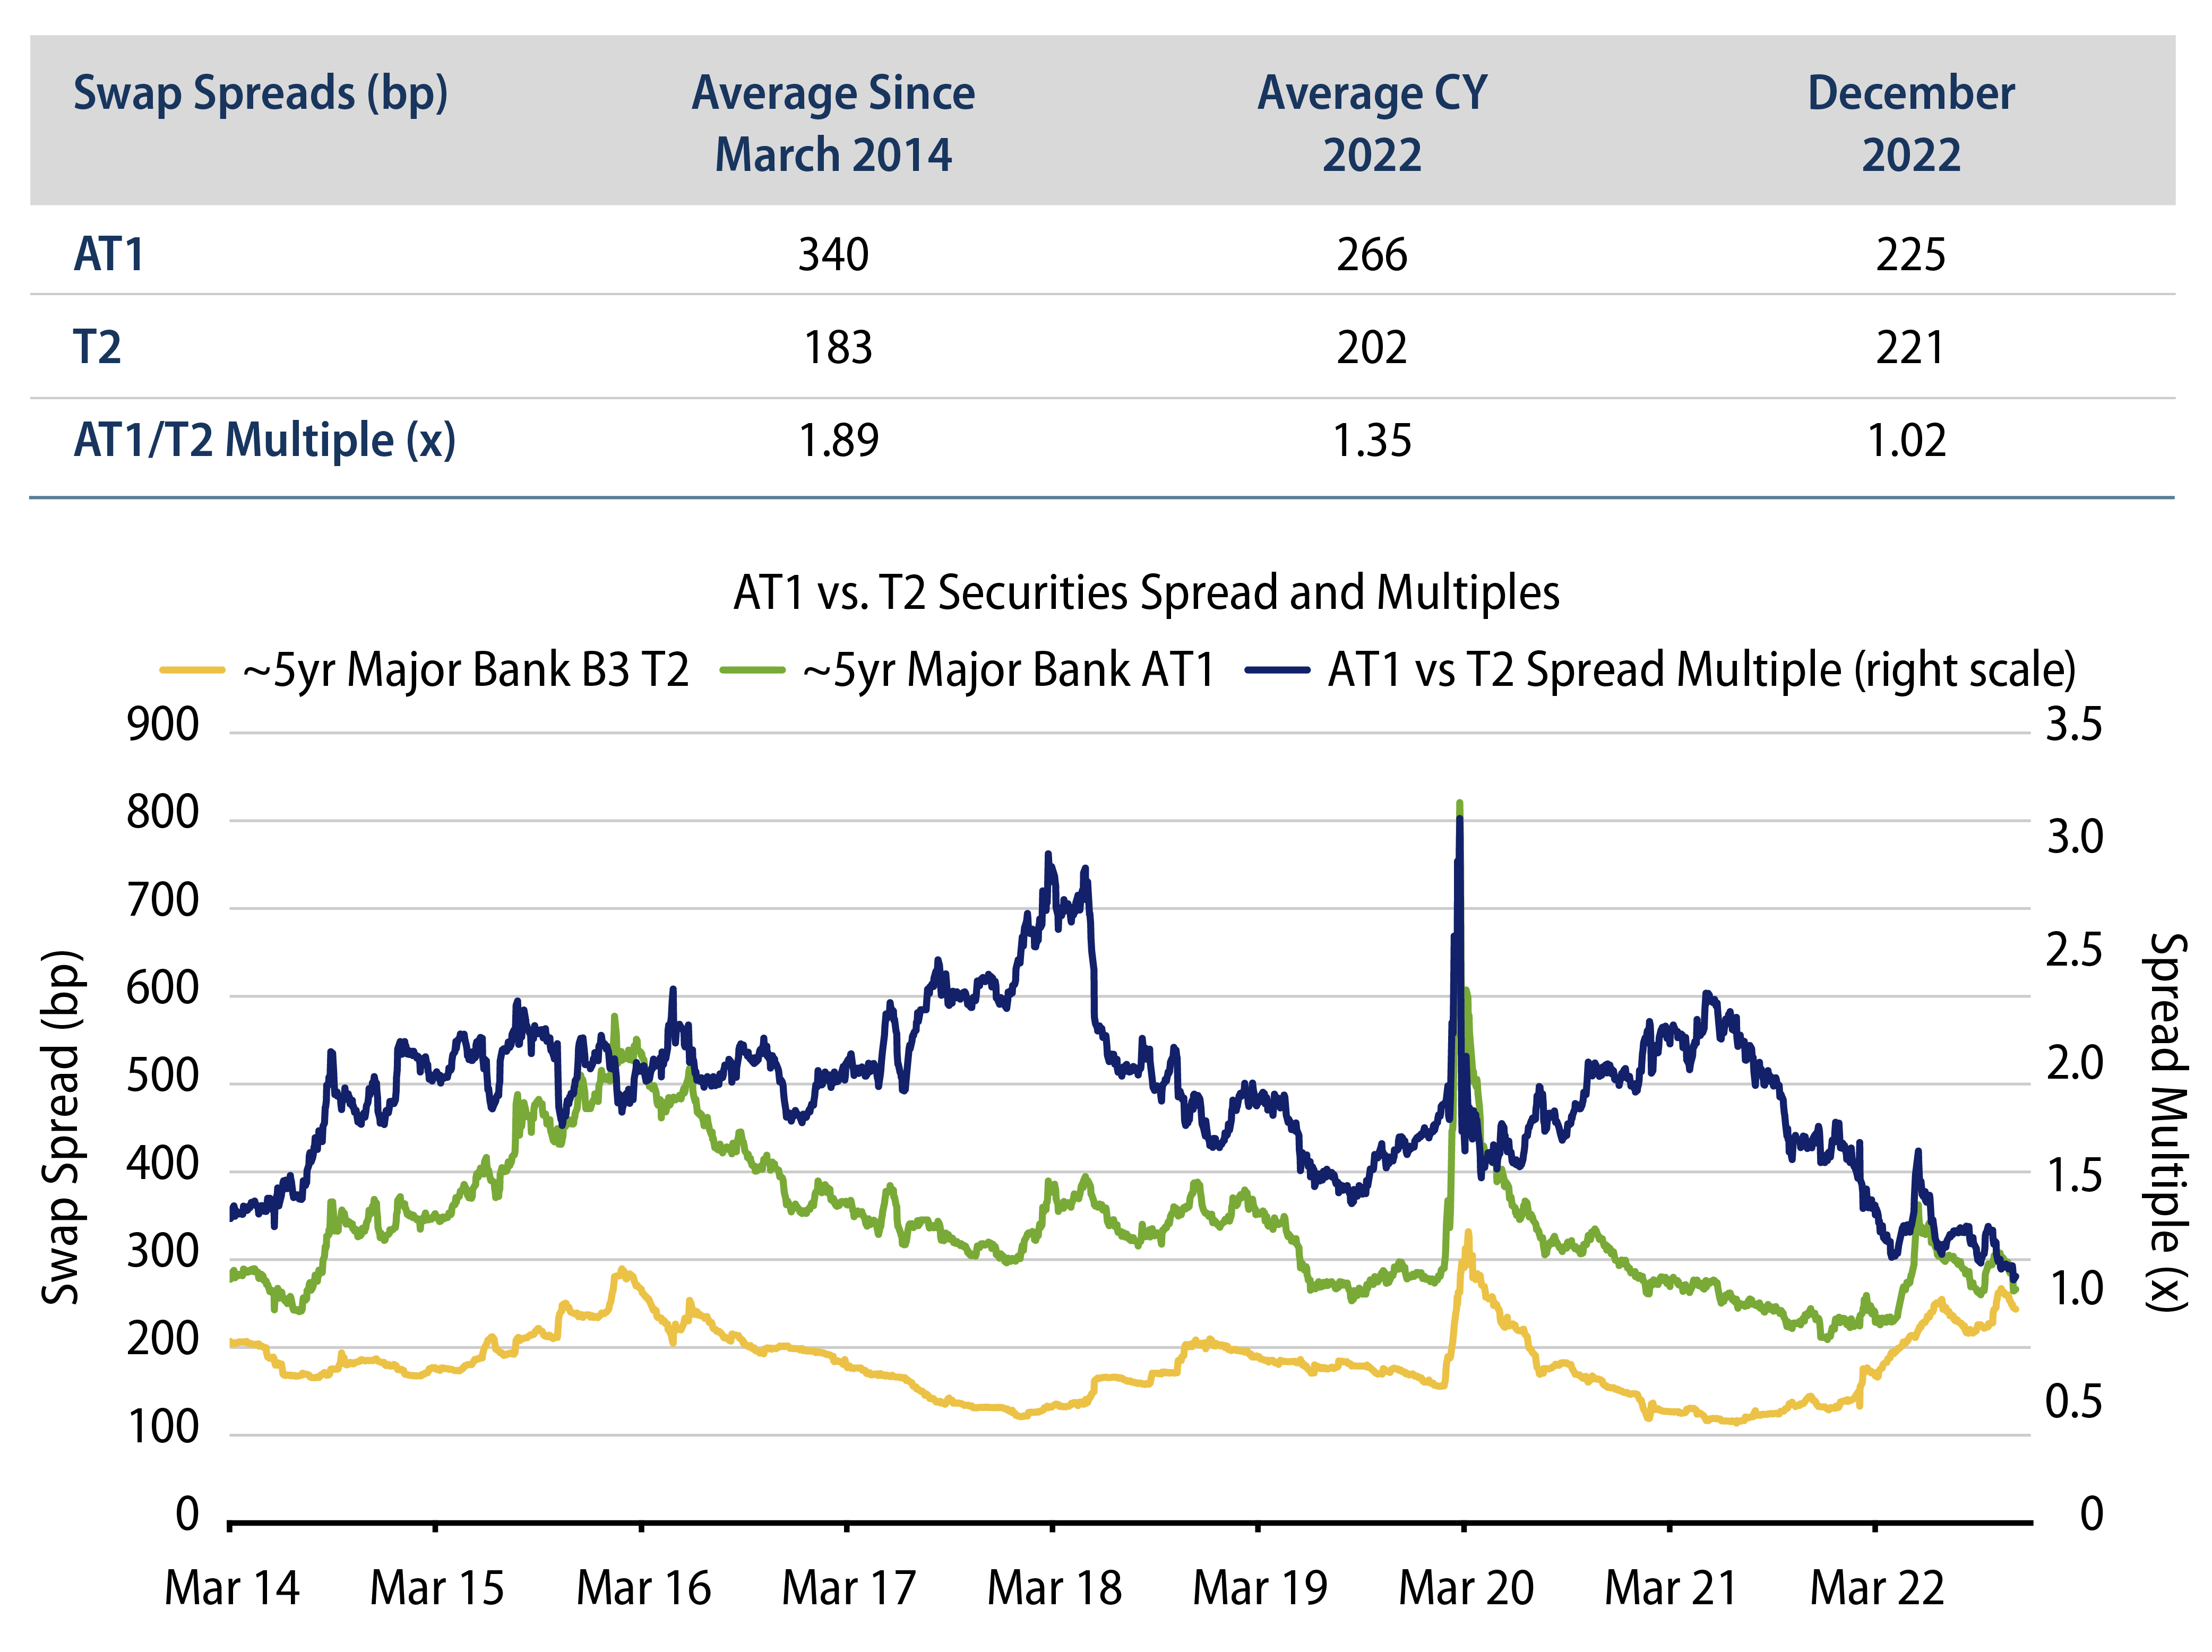 AT1 Versus T2 Securities Spread and Multiples